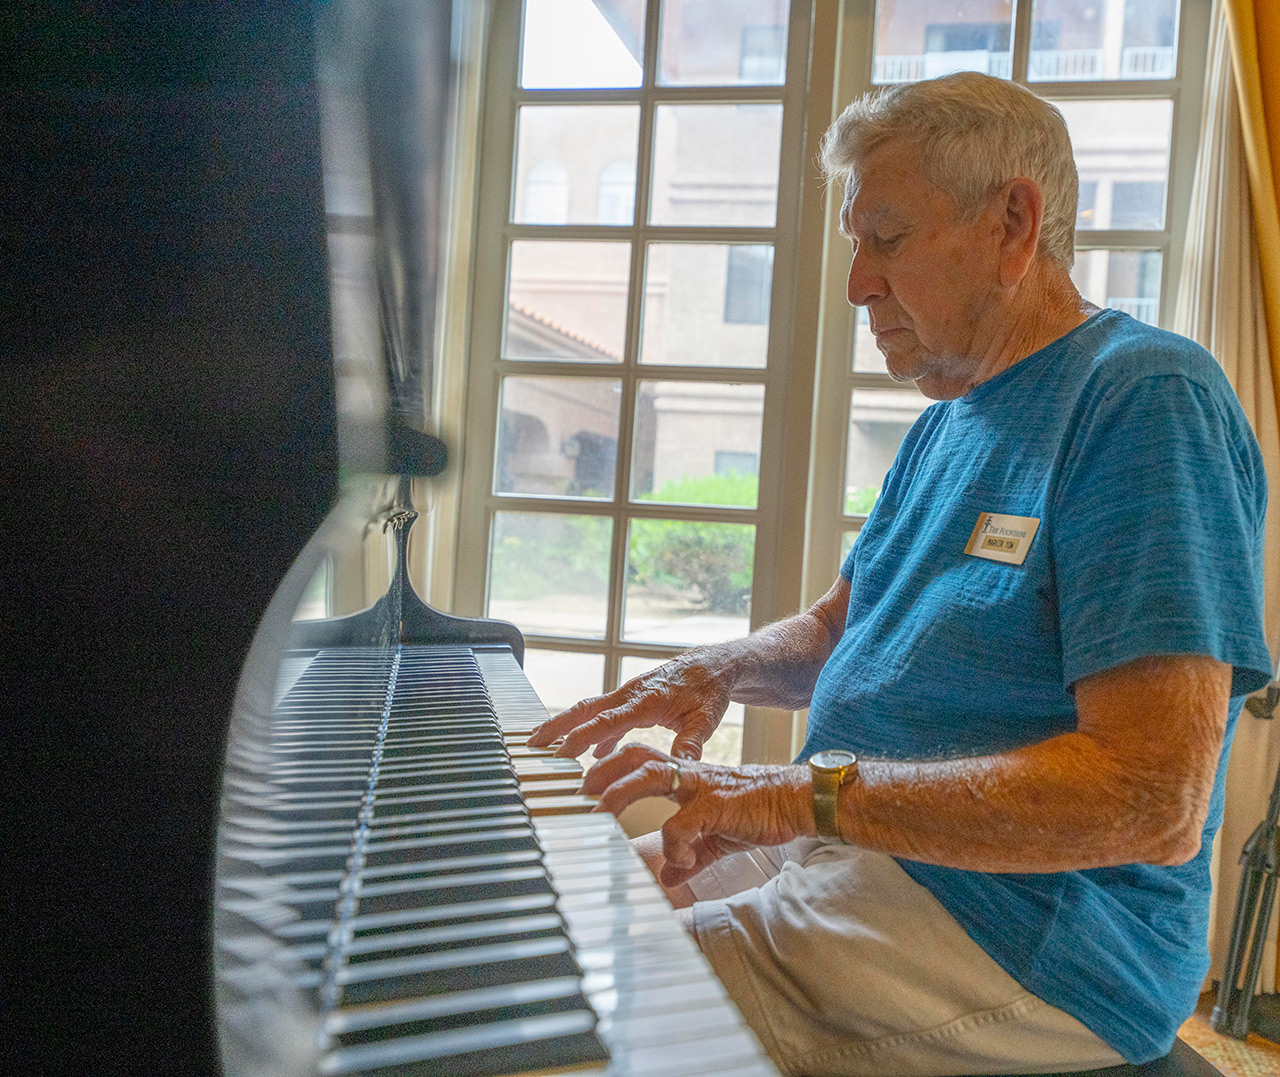 A resident is playing a piano.